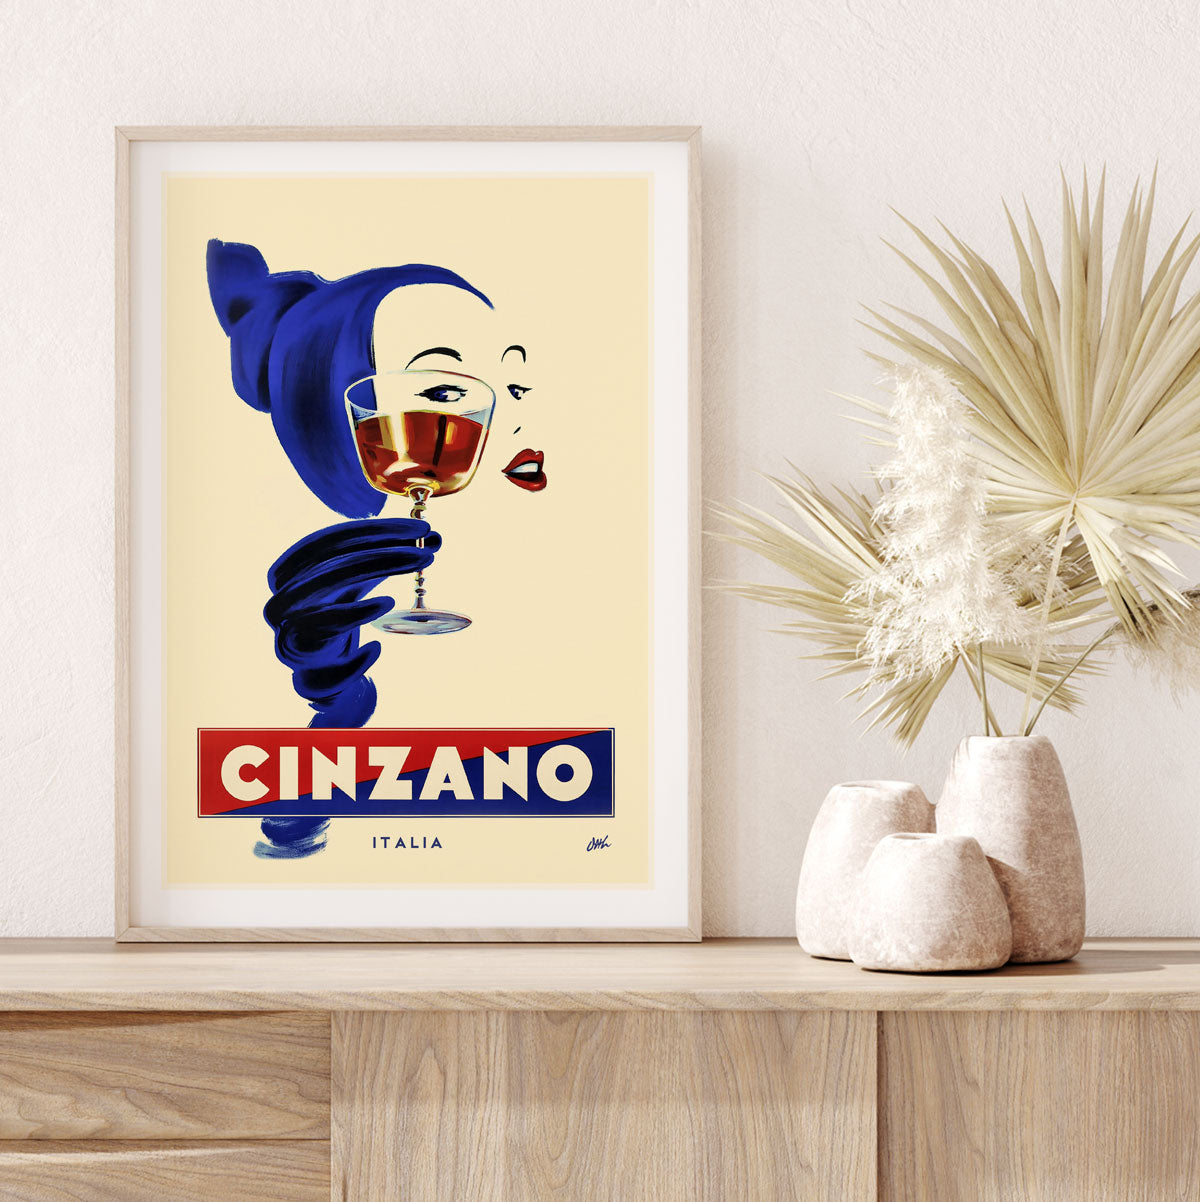 Cinzano retro vintage advertising poster print Italy from Places We Luv